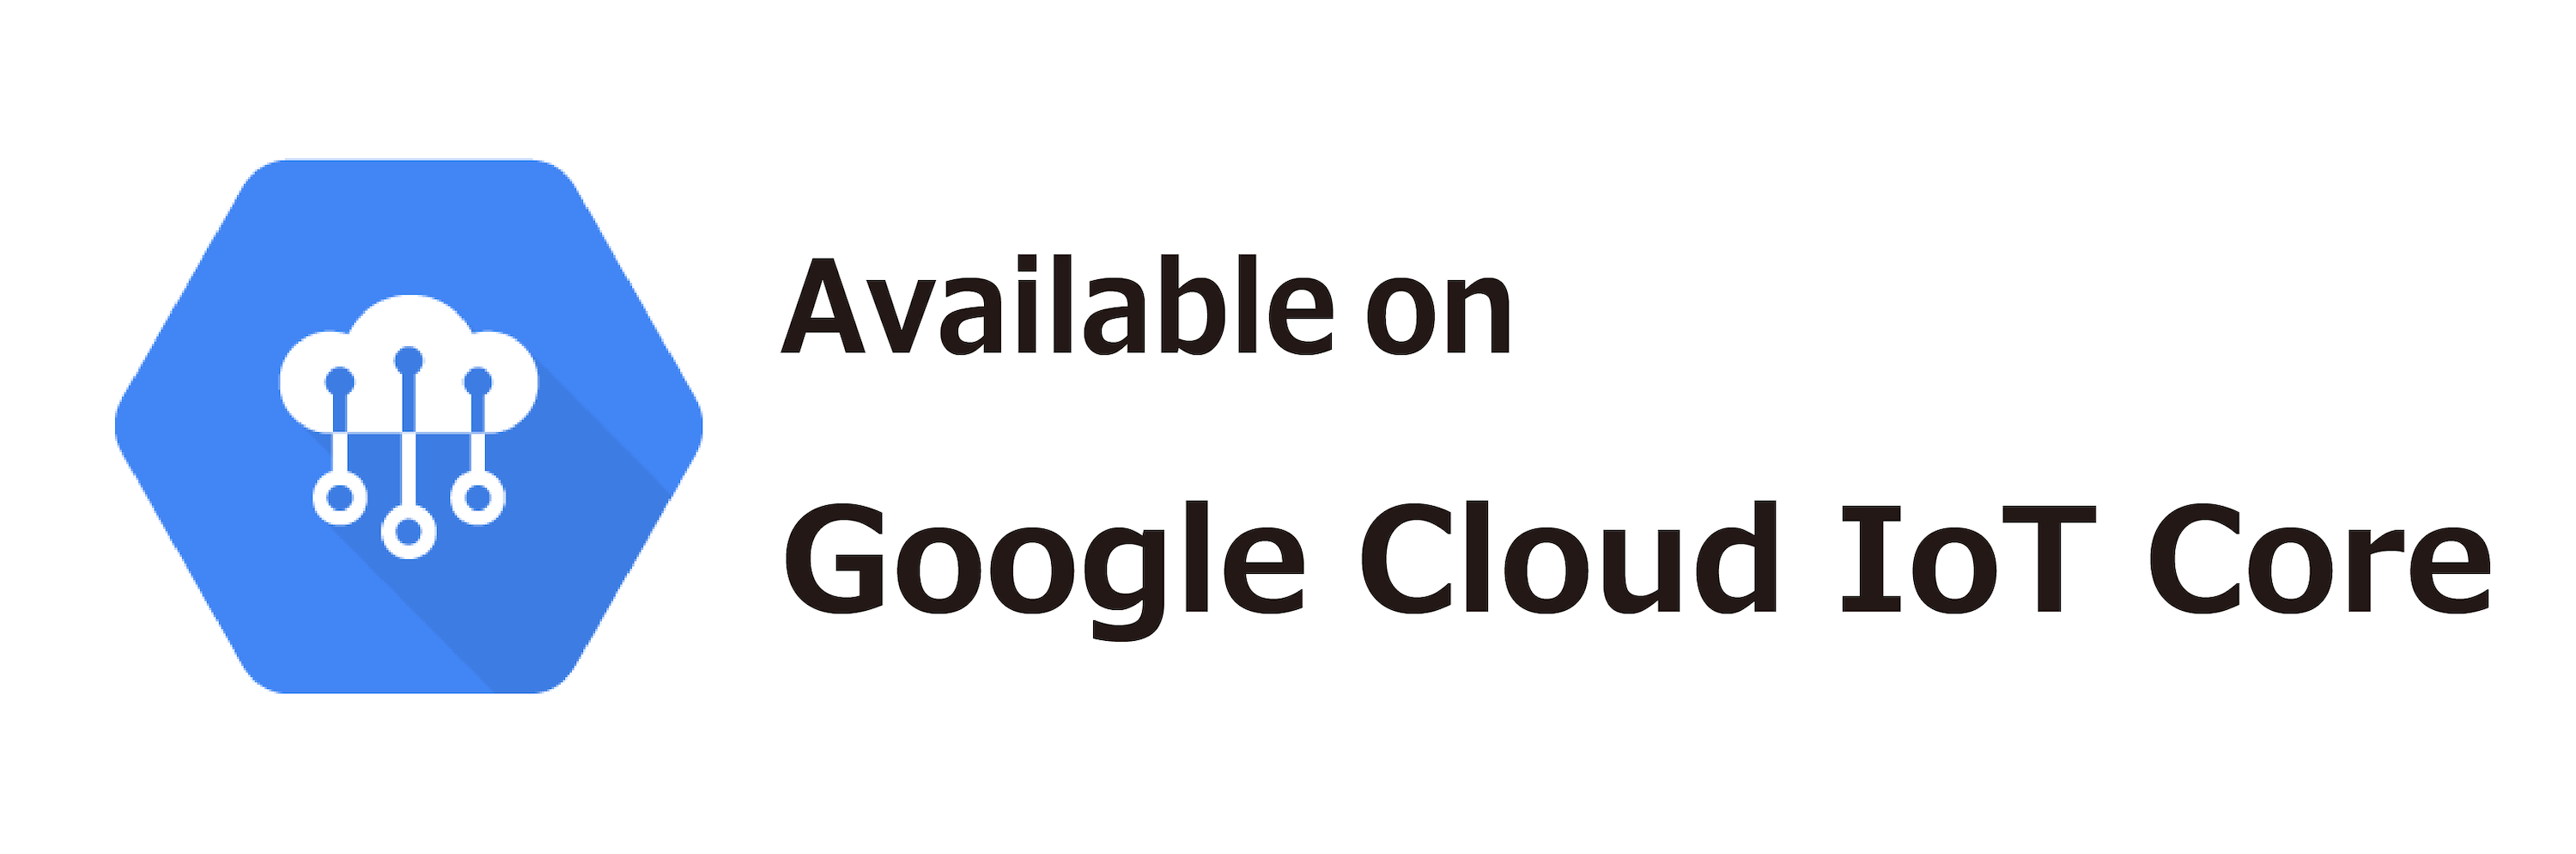 available on Google Cloud IoT Core